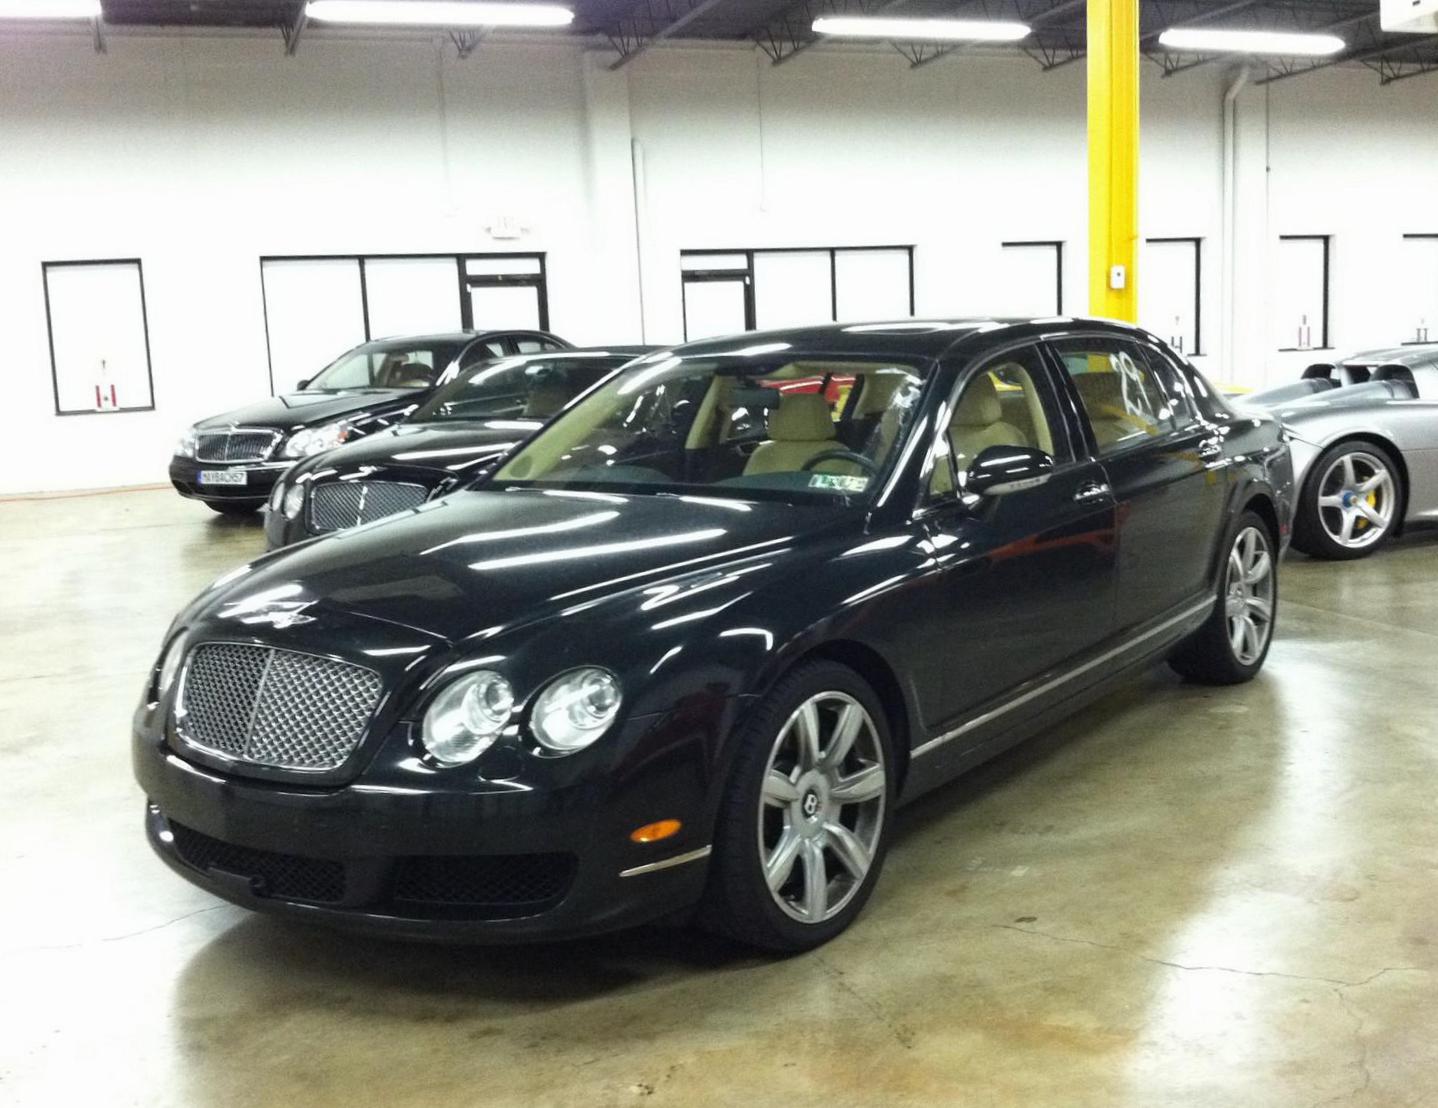 Continental Flying Spur Bentley price 2012